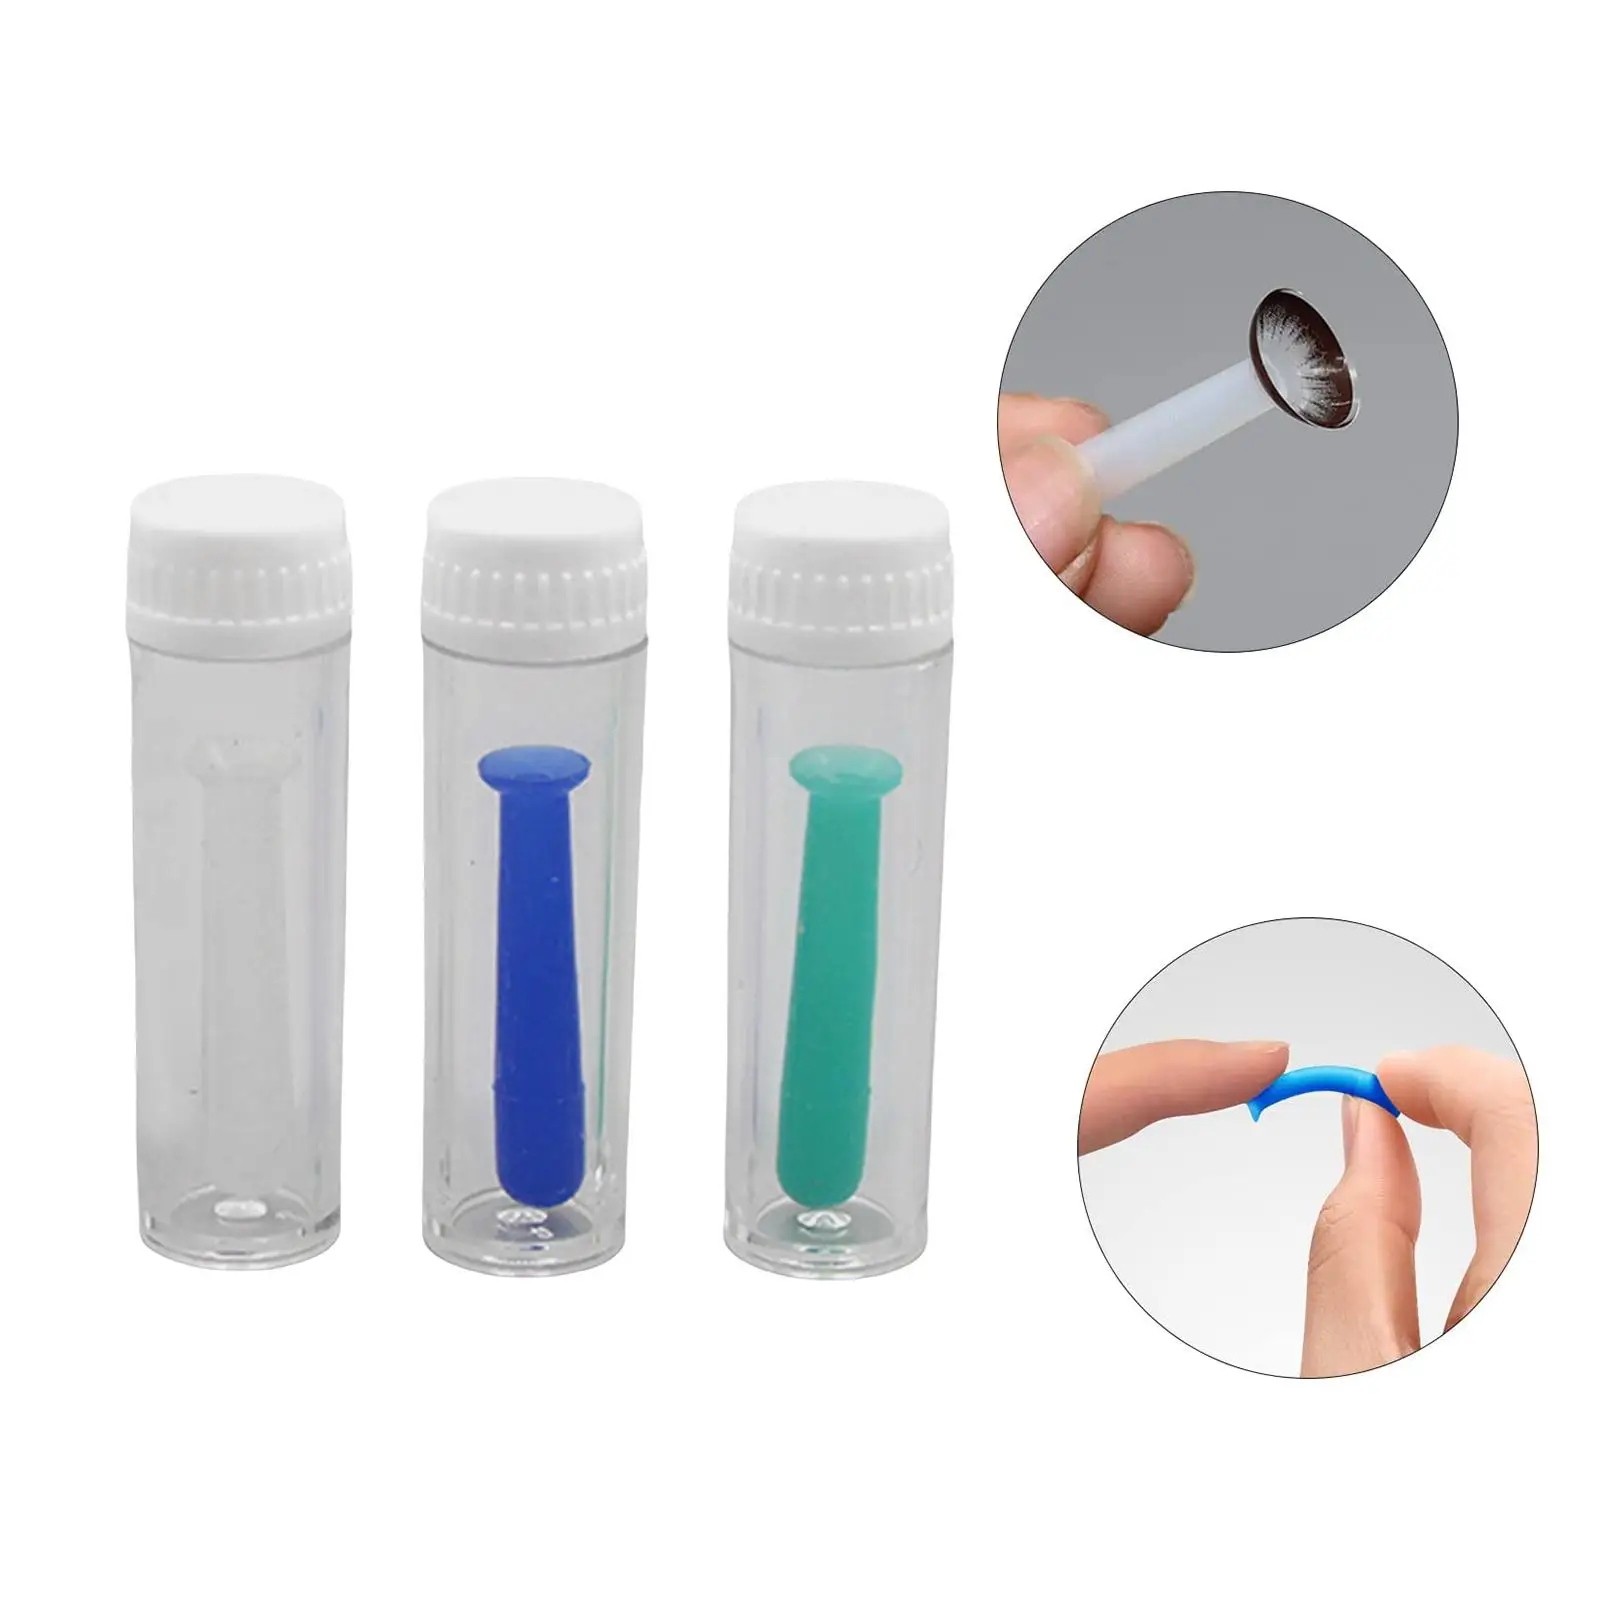 Contacts Remover Applicator Compact Lightweight for Soft Contacts